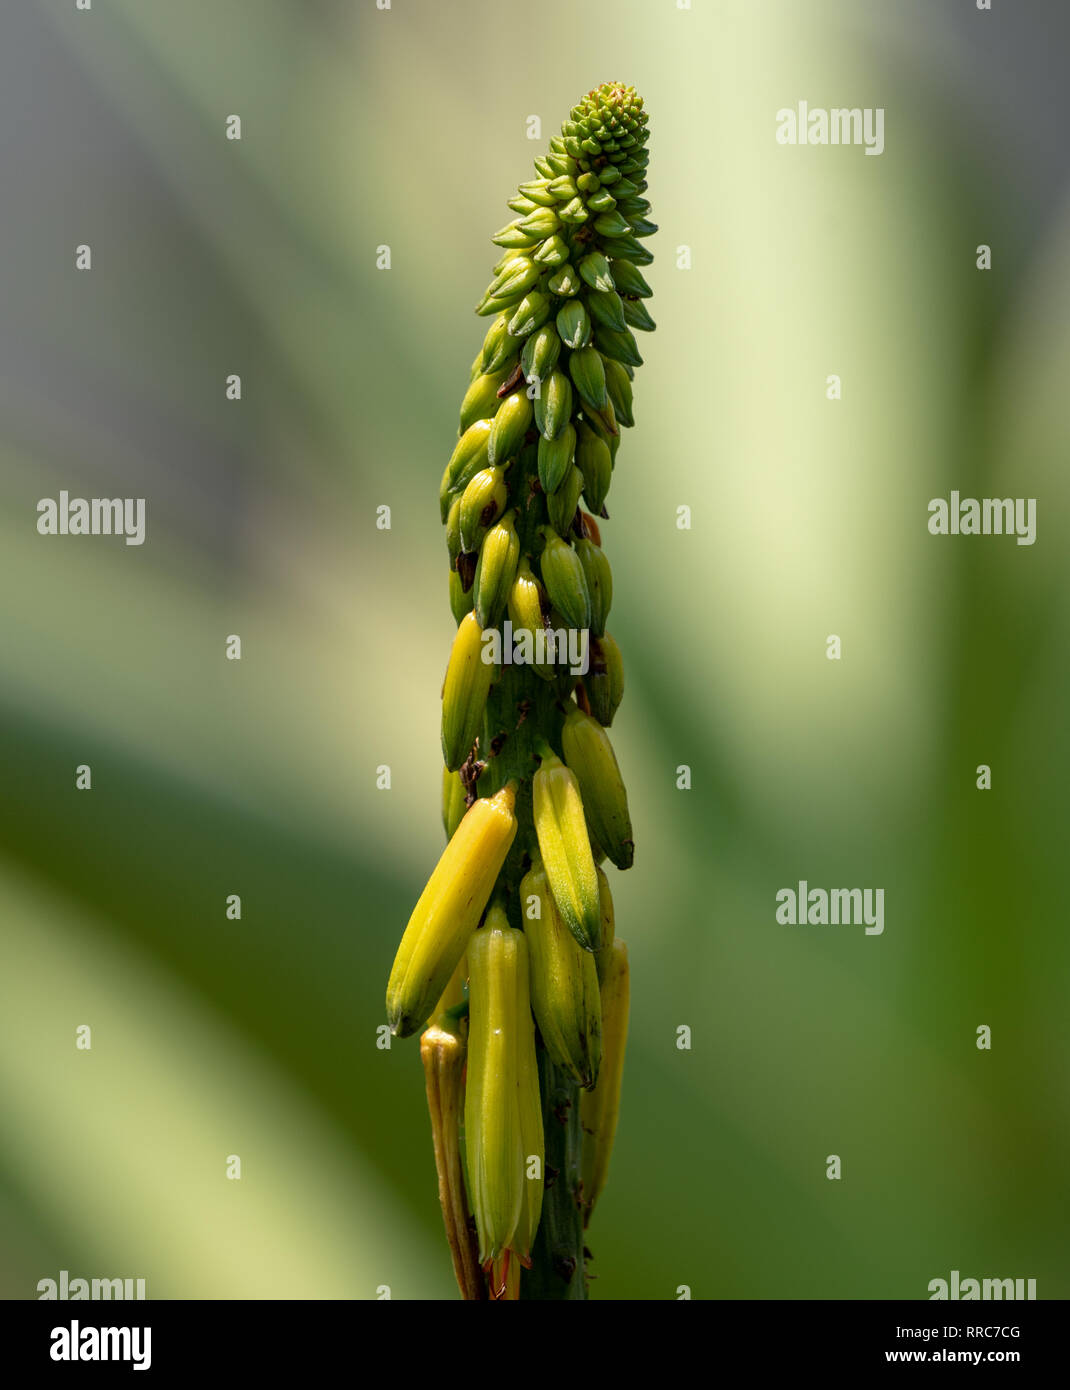 A closeup view of an unopened aloe flower against a blurred background. Aloiampelos tenuior. Stock Photo